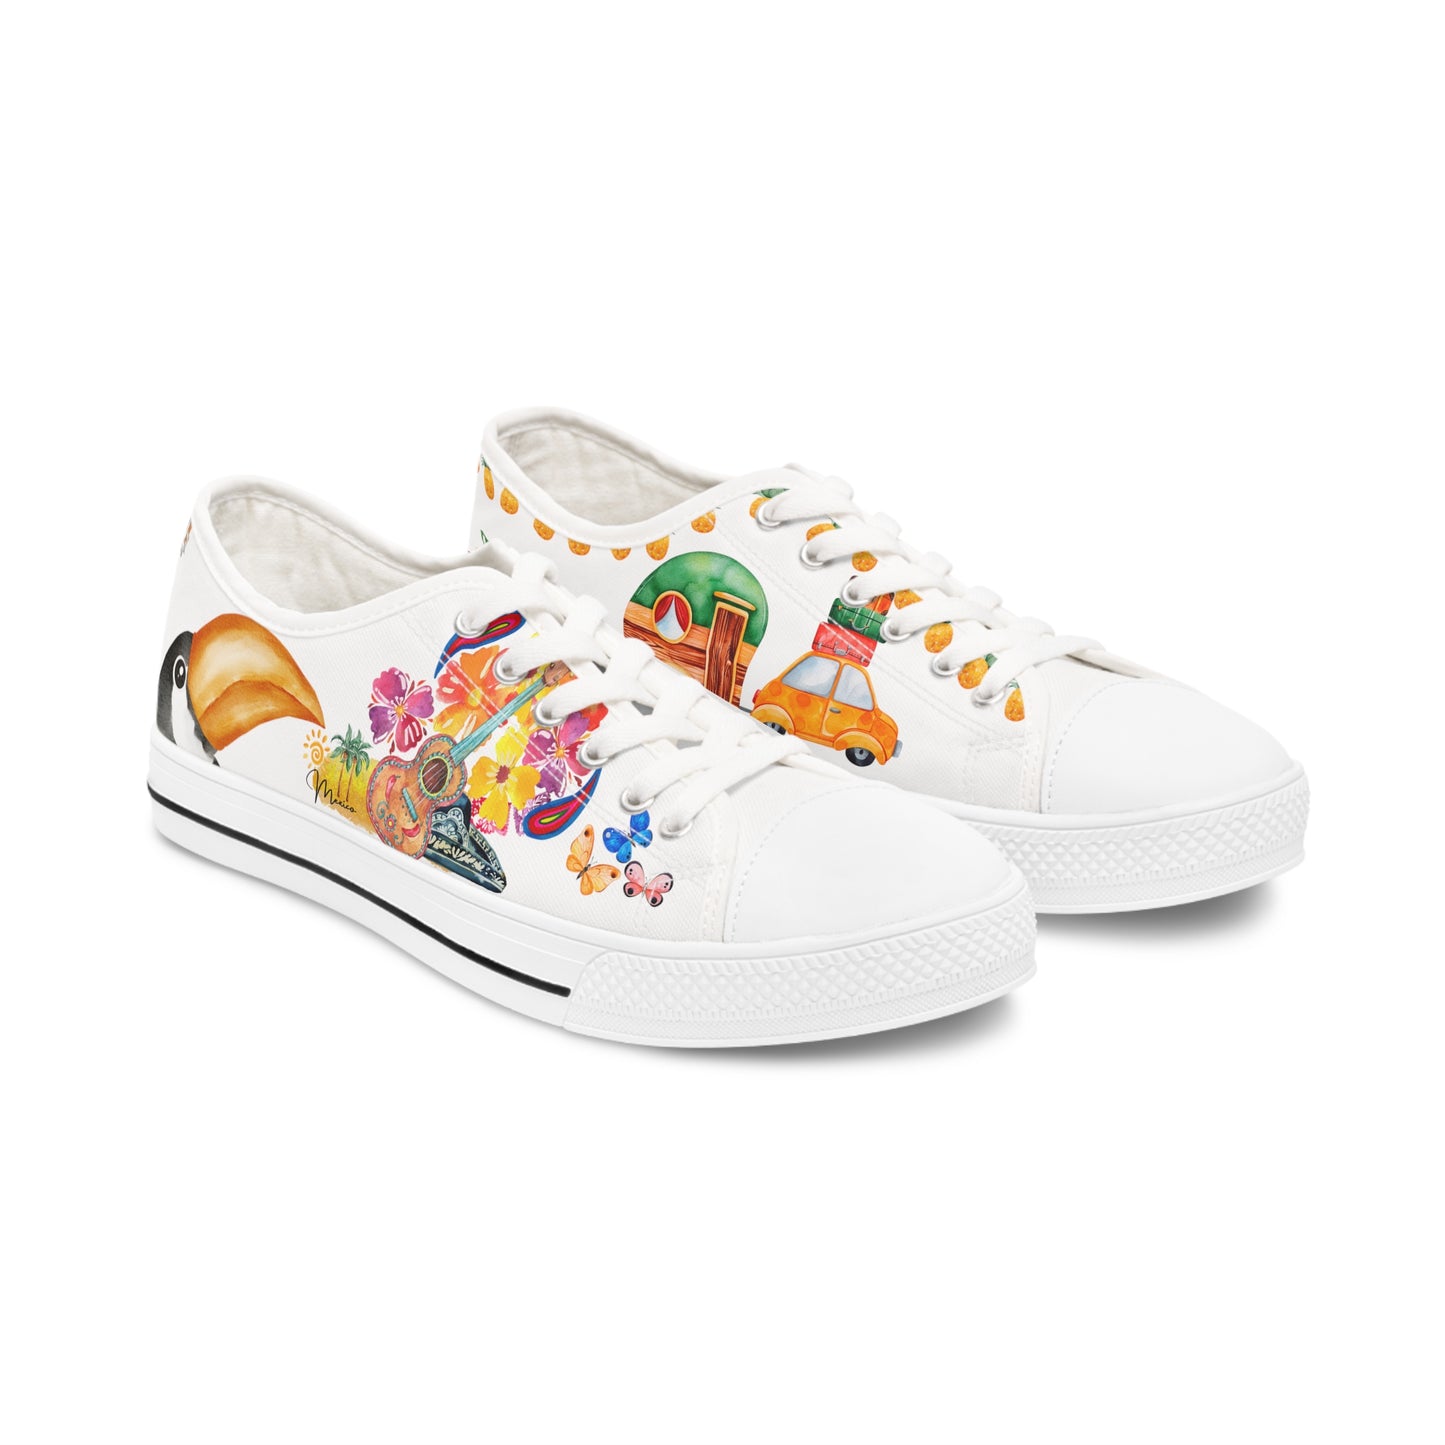 Mexico is calling & i must Go- Travel Edition - White Background Sneakers